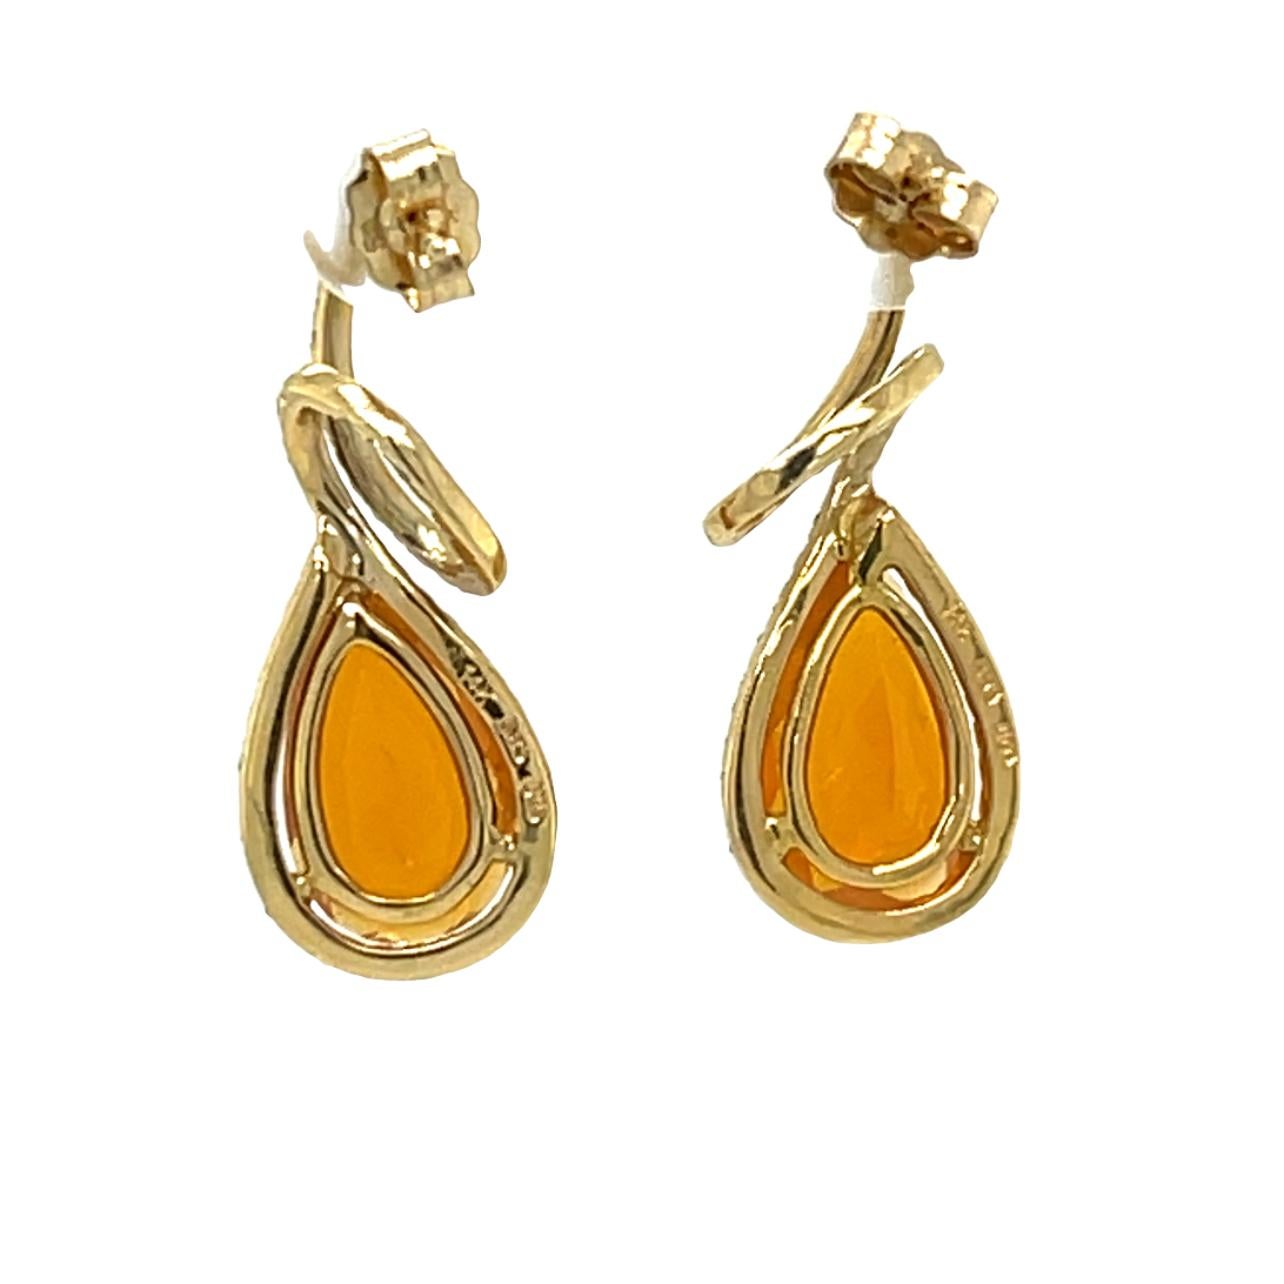 14x8mm Teardrop Fire Opal Earrings in 14K yellow gold In New Condition For Sale In New York, NY